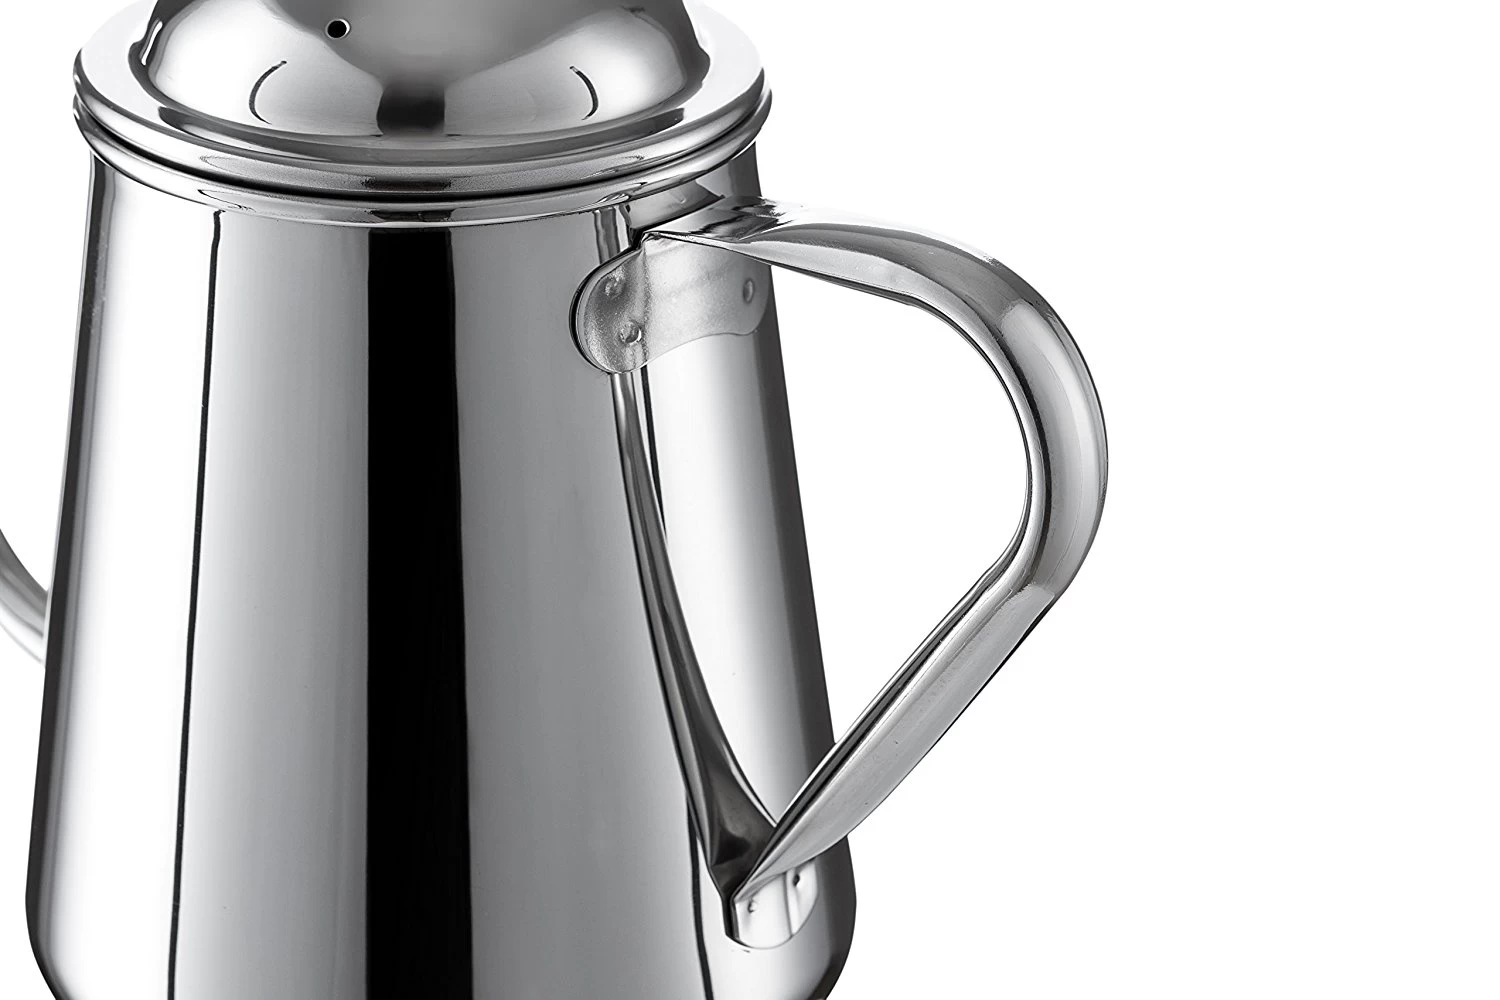 China Stainless Steel Coffee pot company, OEM coffee pot manufacturer, China Stainless Steel Coffee Pot Factory